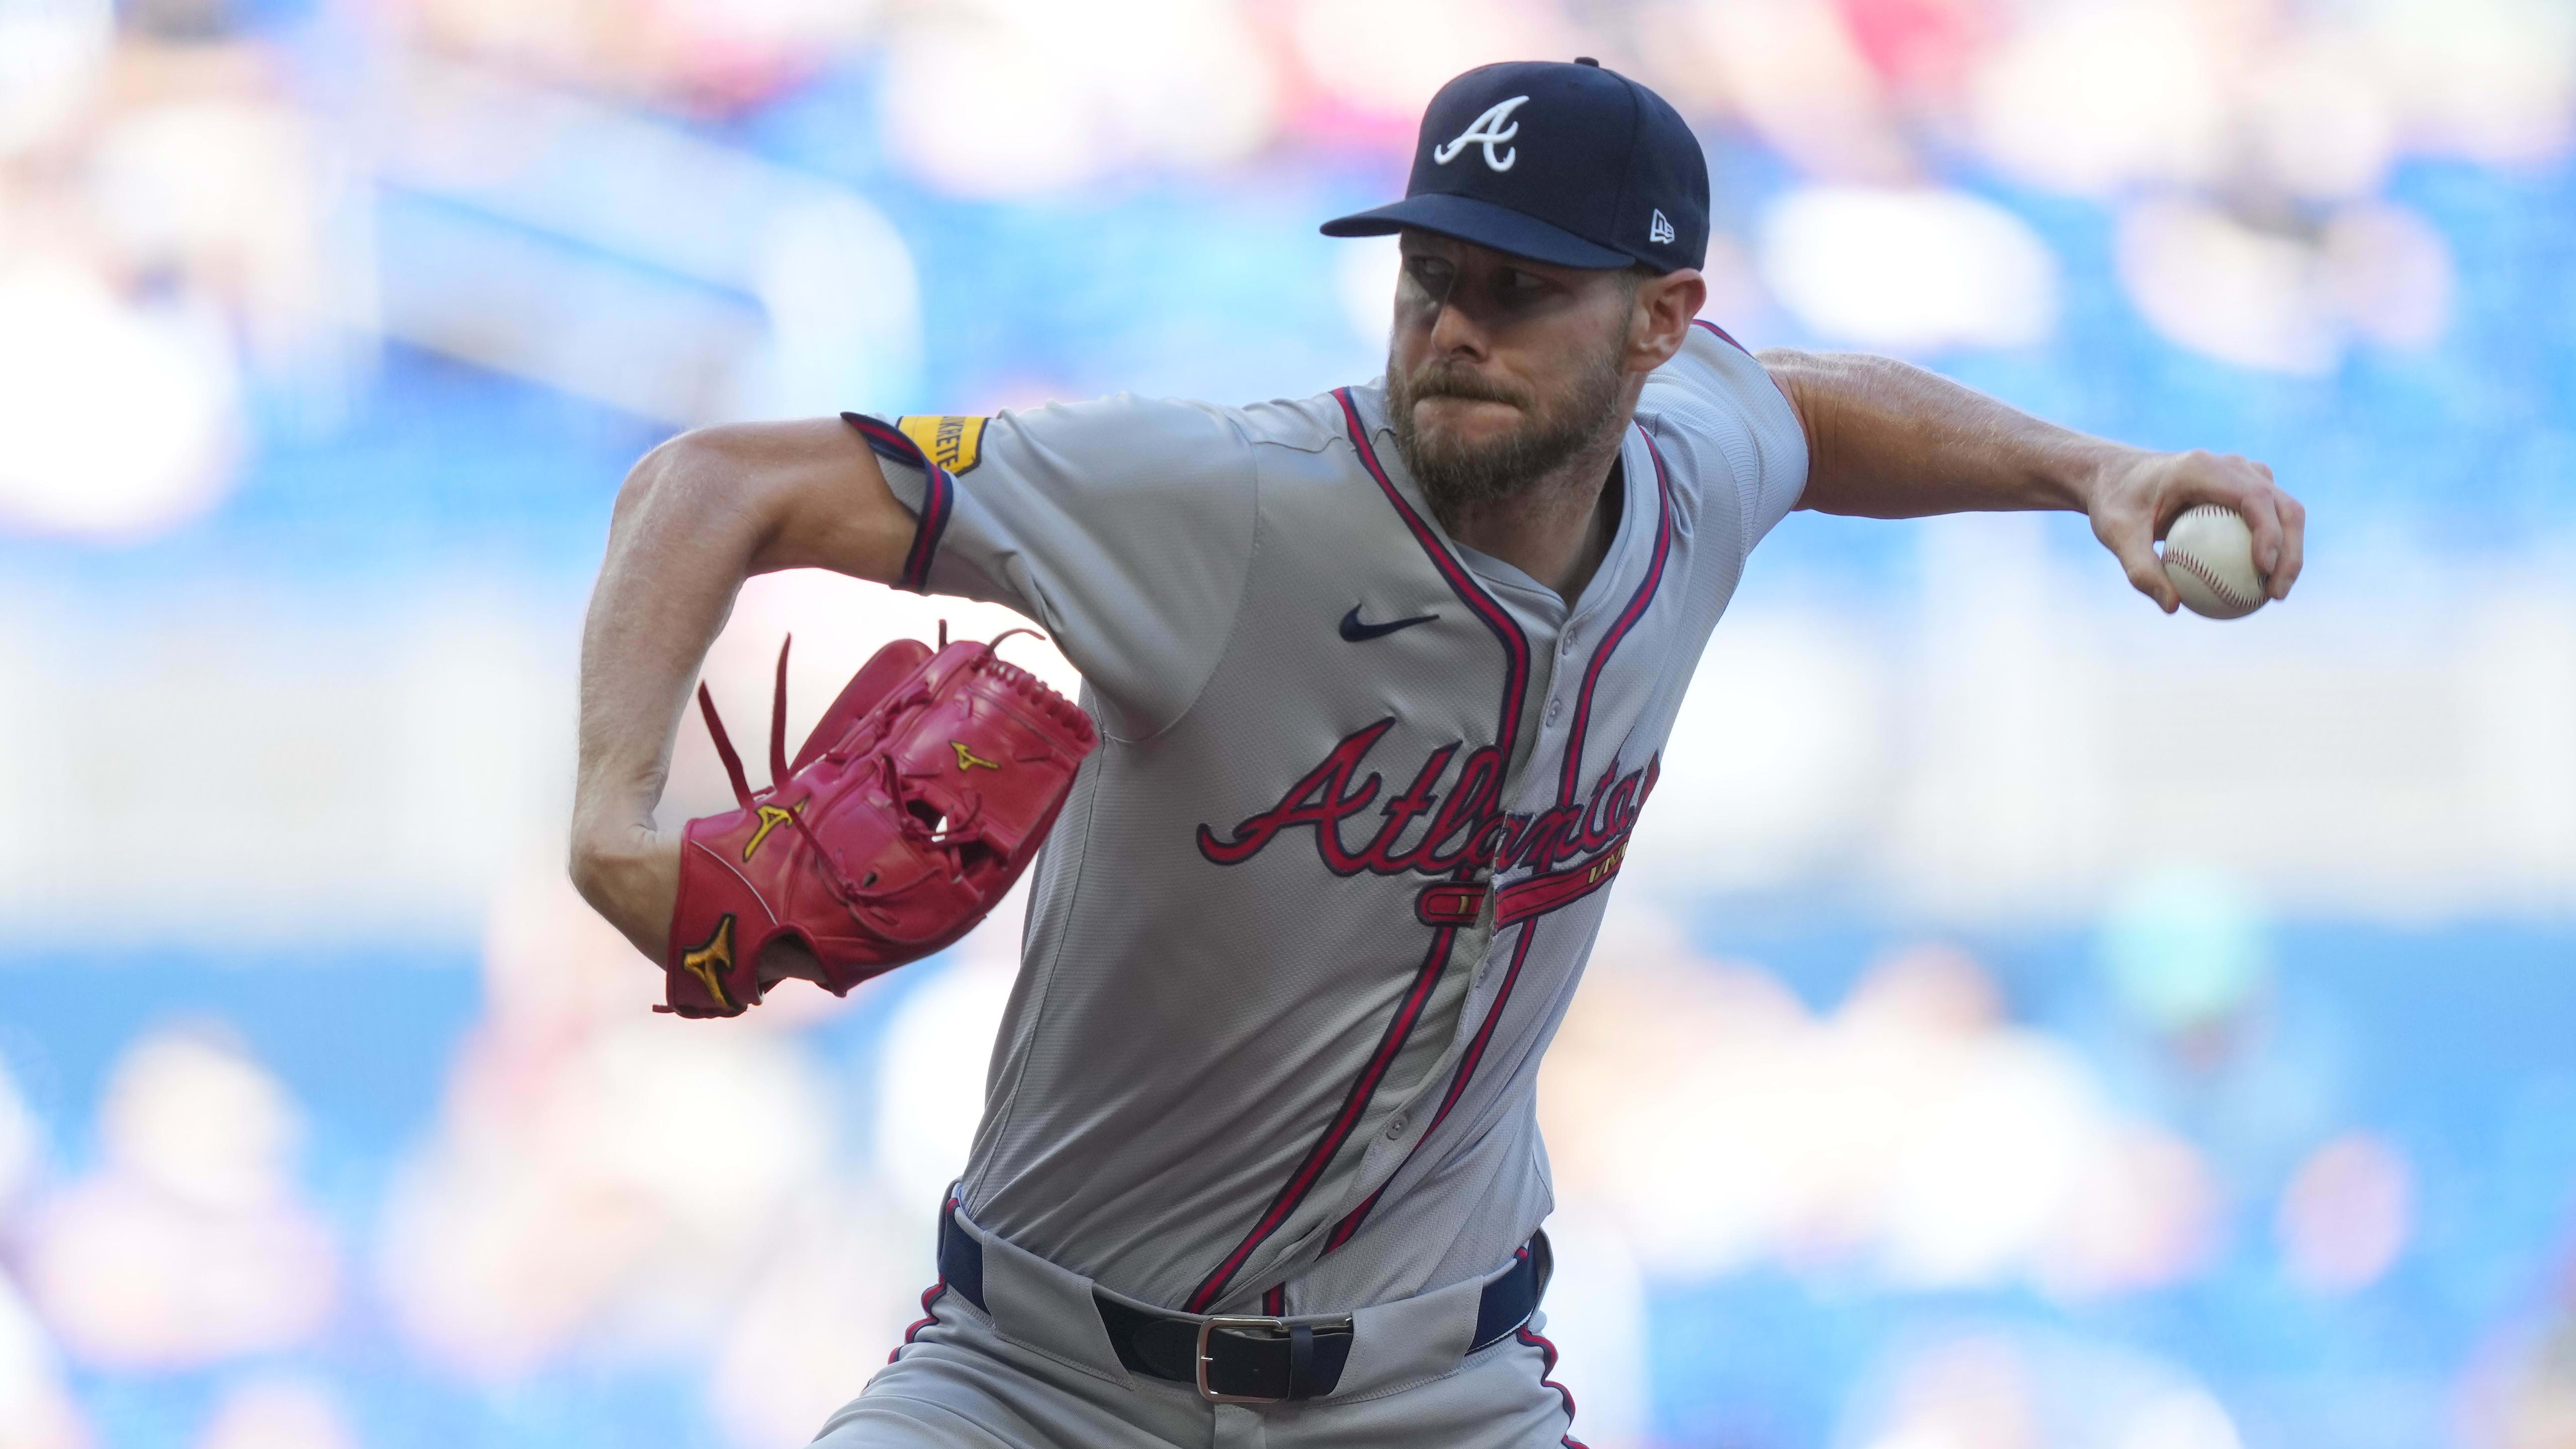 Braves vs Mariners: Chris Sale to Pitch in Series Finale to Avoid Sweep